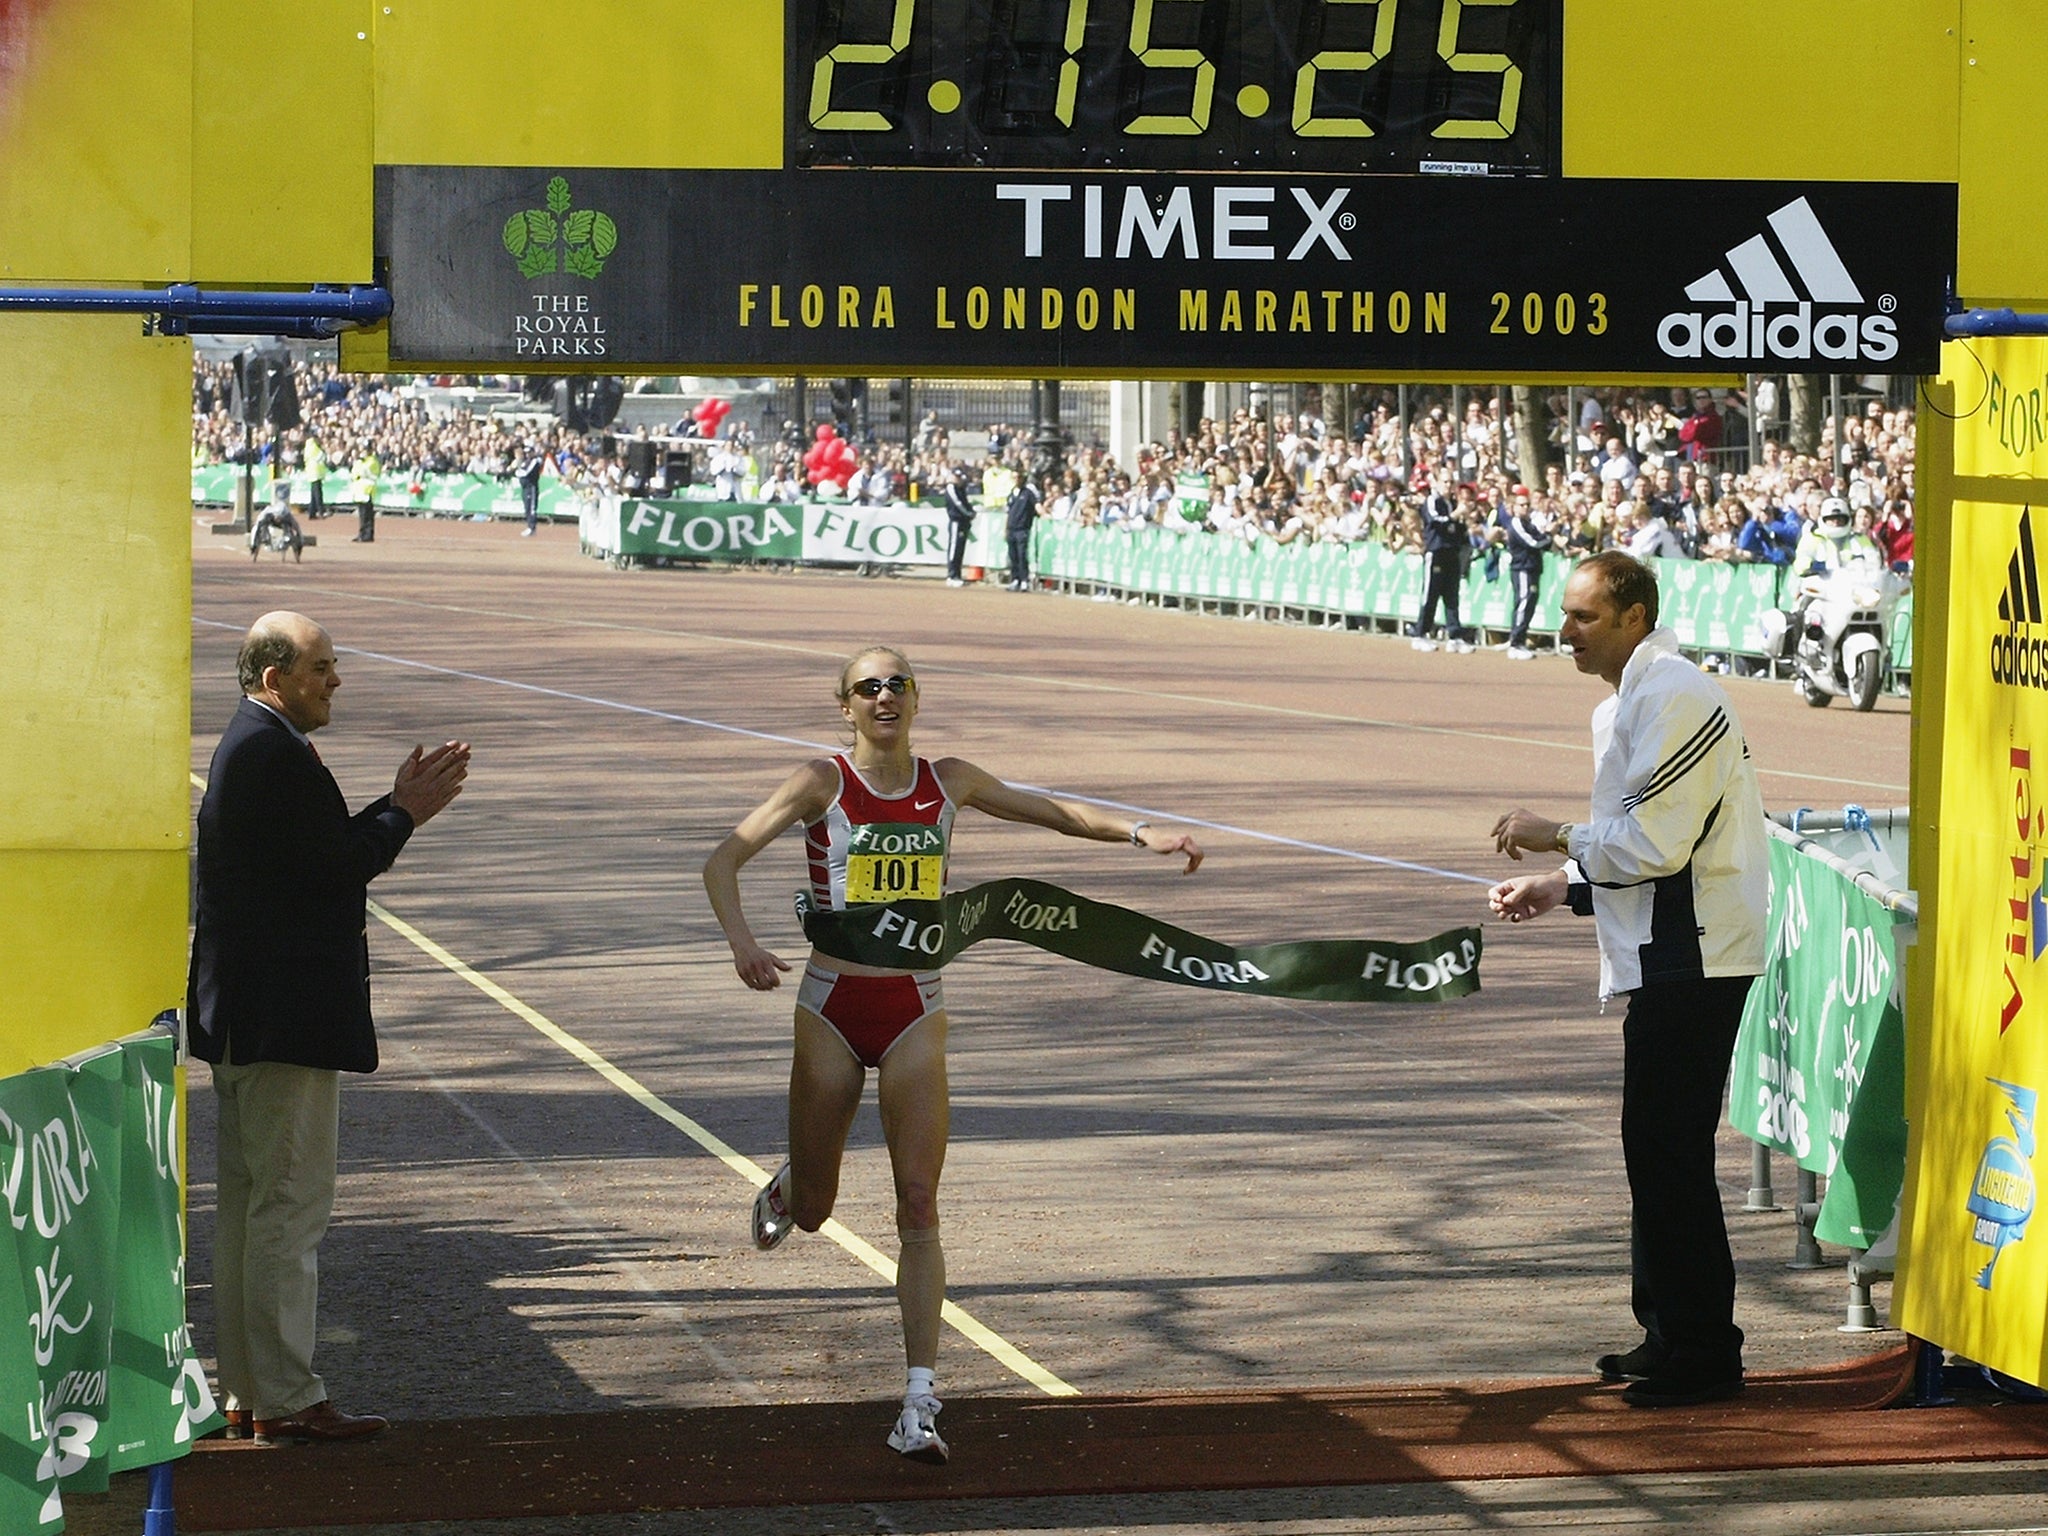 Paula Radcliffe's world record set in 2003 would be wiped out under the proposals